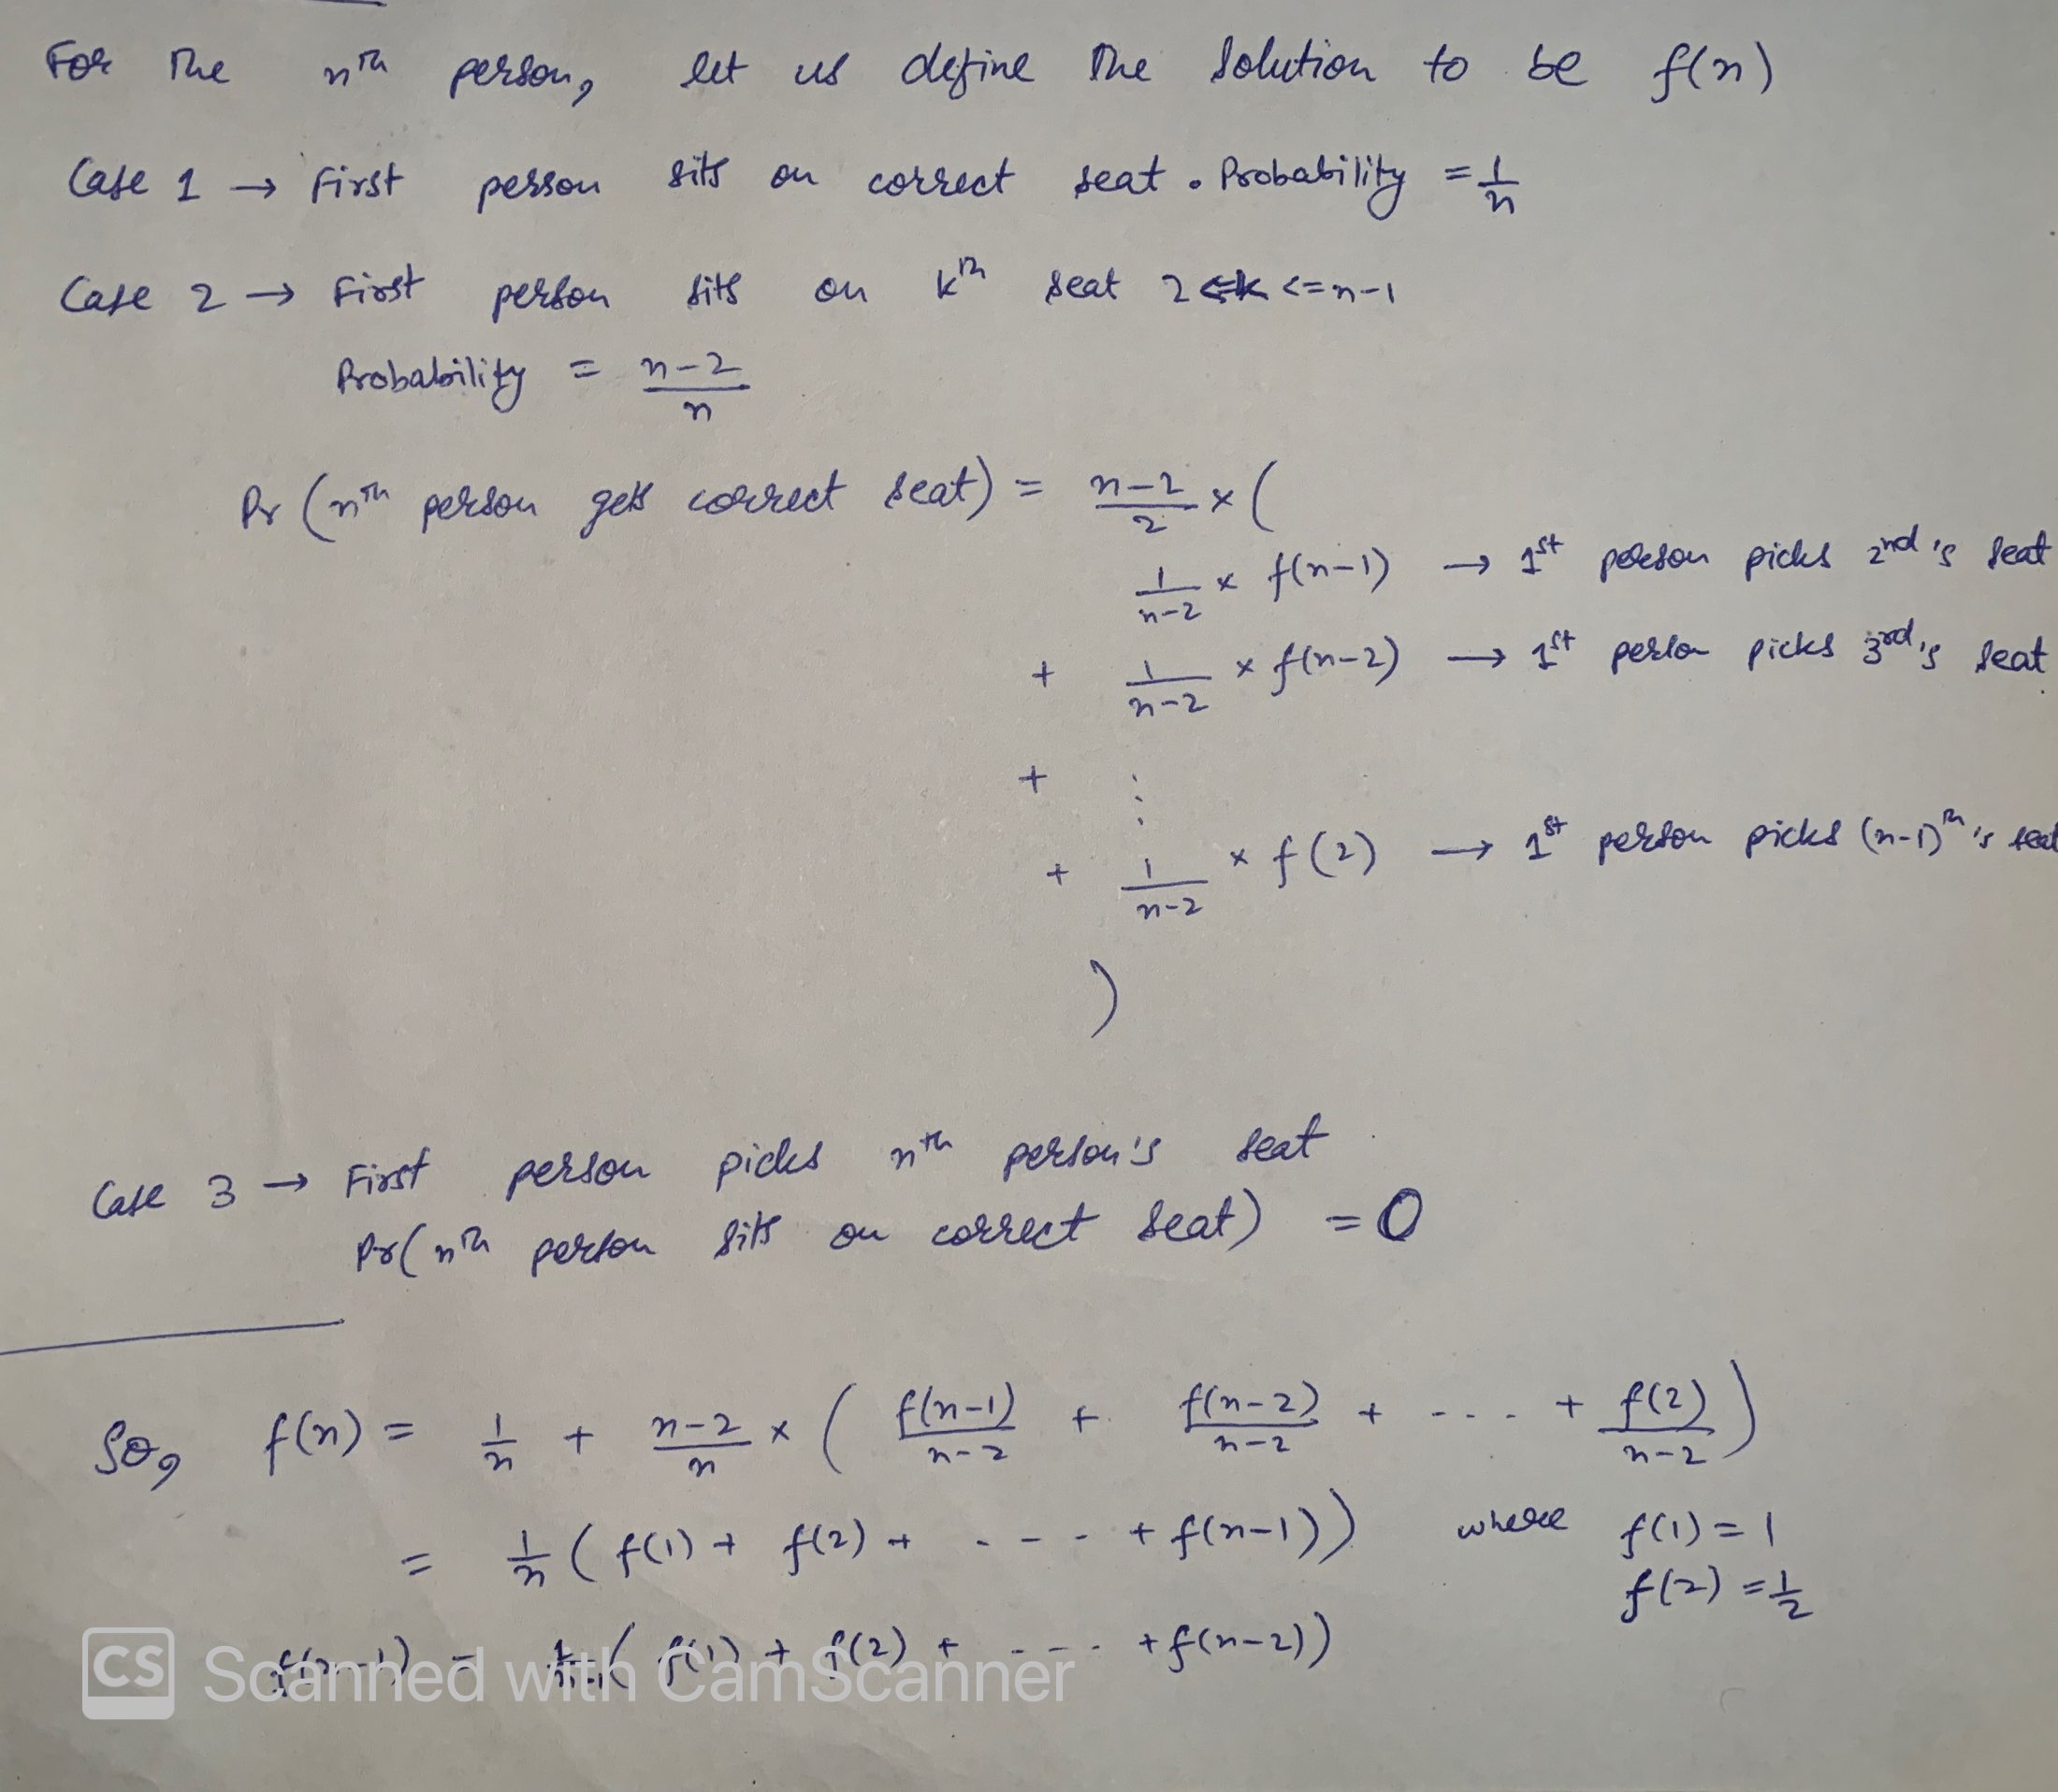 airplane seat assignment probability solution